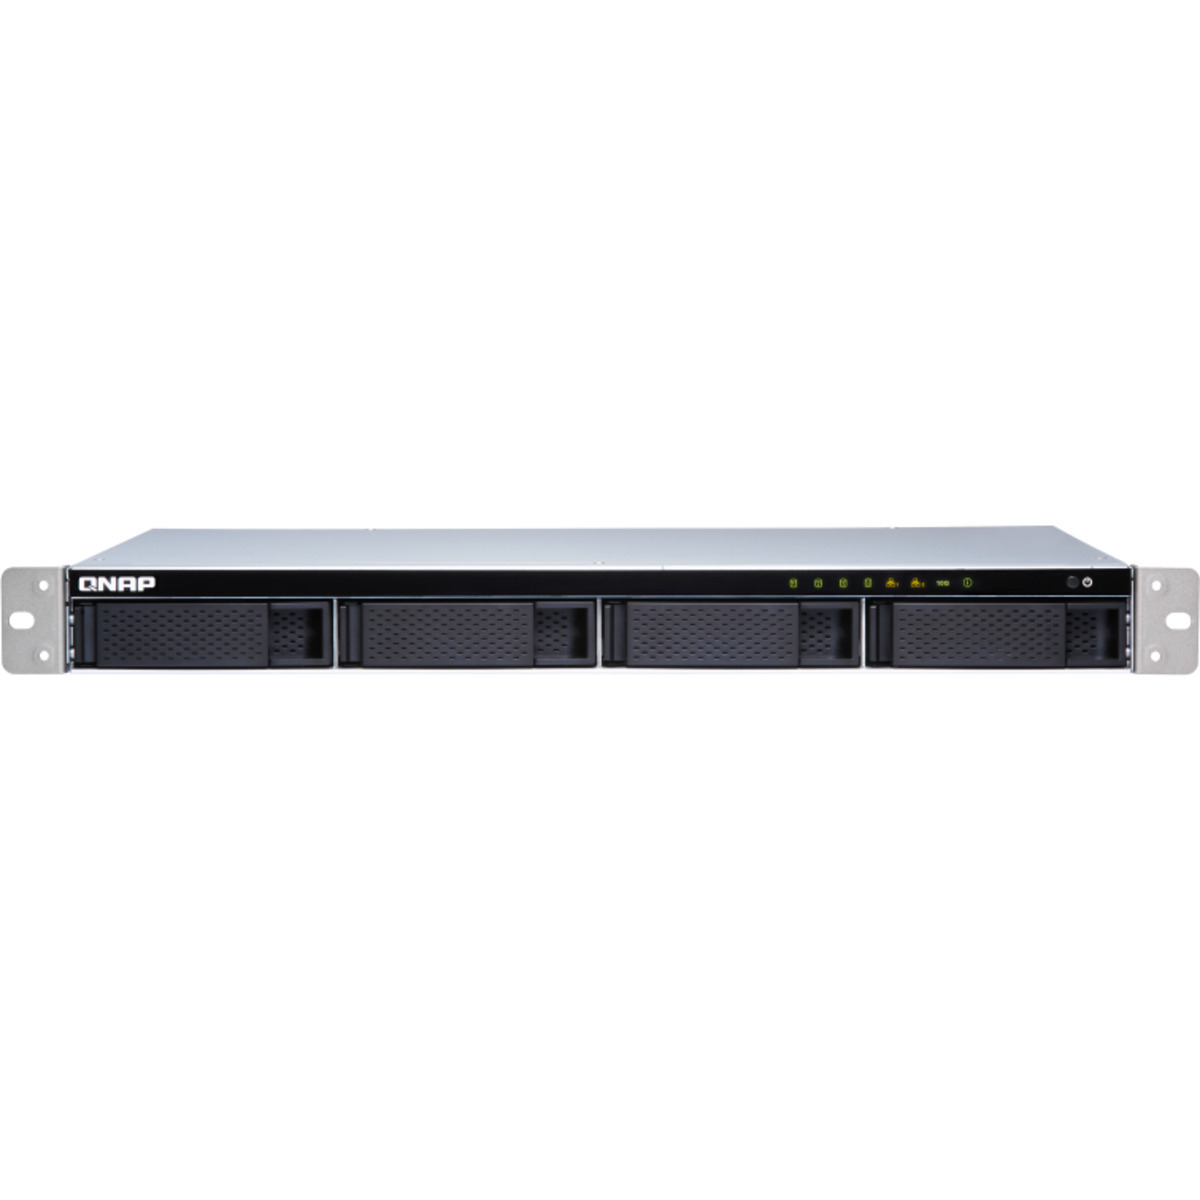 QNAP TS-431XeU 30tb 4-Bay RackMount Multimedia / Power User / Business NAS - Network Attached Storage Device 3x10tb Seagate EXOS X18 ST10000NM018G 3.5 7200rpm SATA 6Gb/s HDD ENTERPRISE Class Drives Installed - Burn-In Tested - FREE RAM UPGRADE TS-431XeU